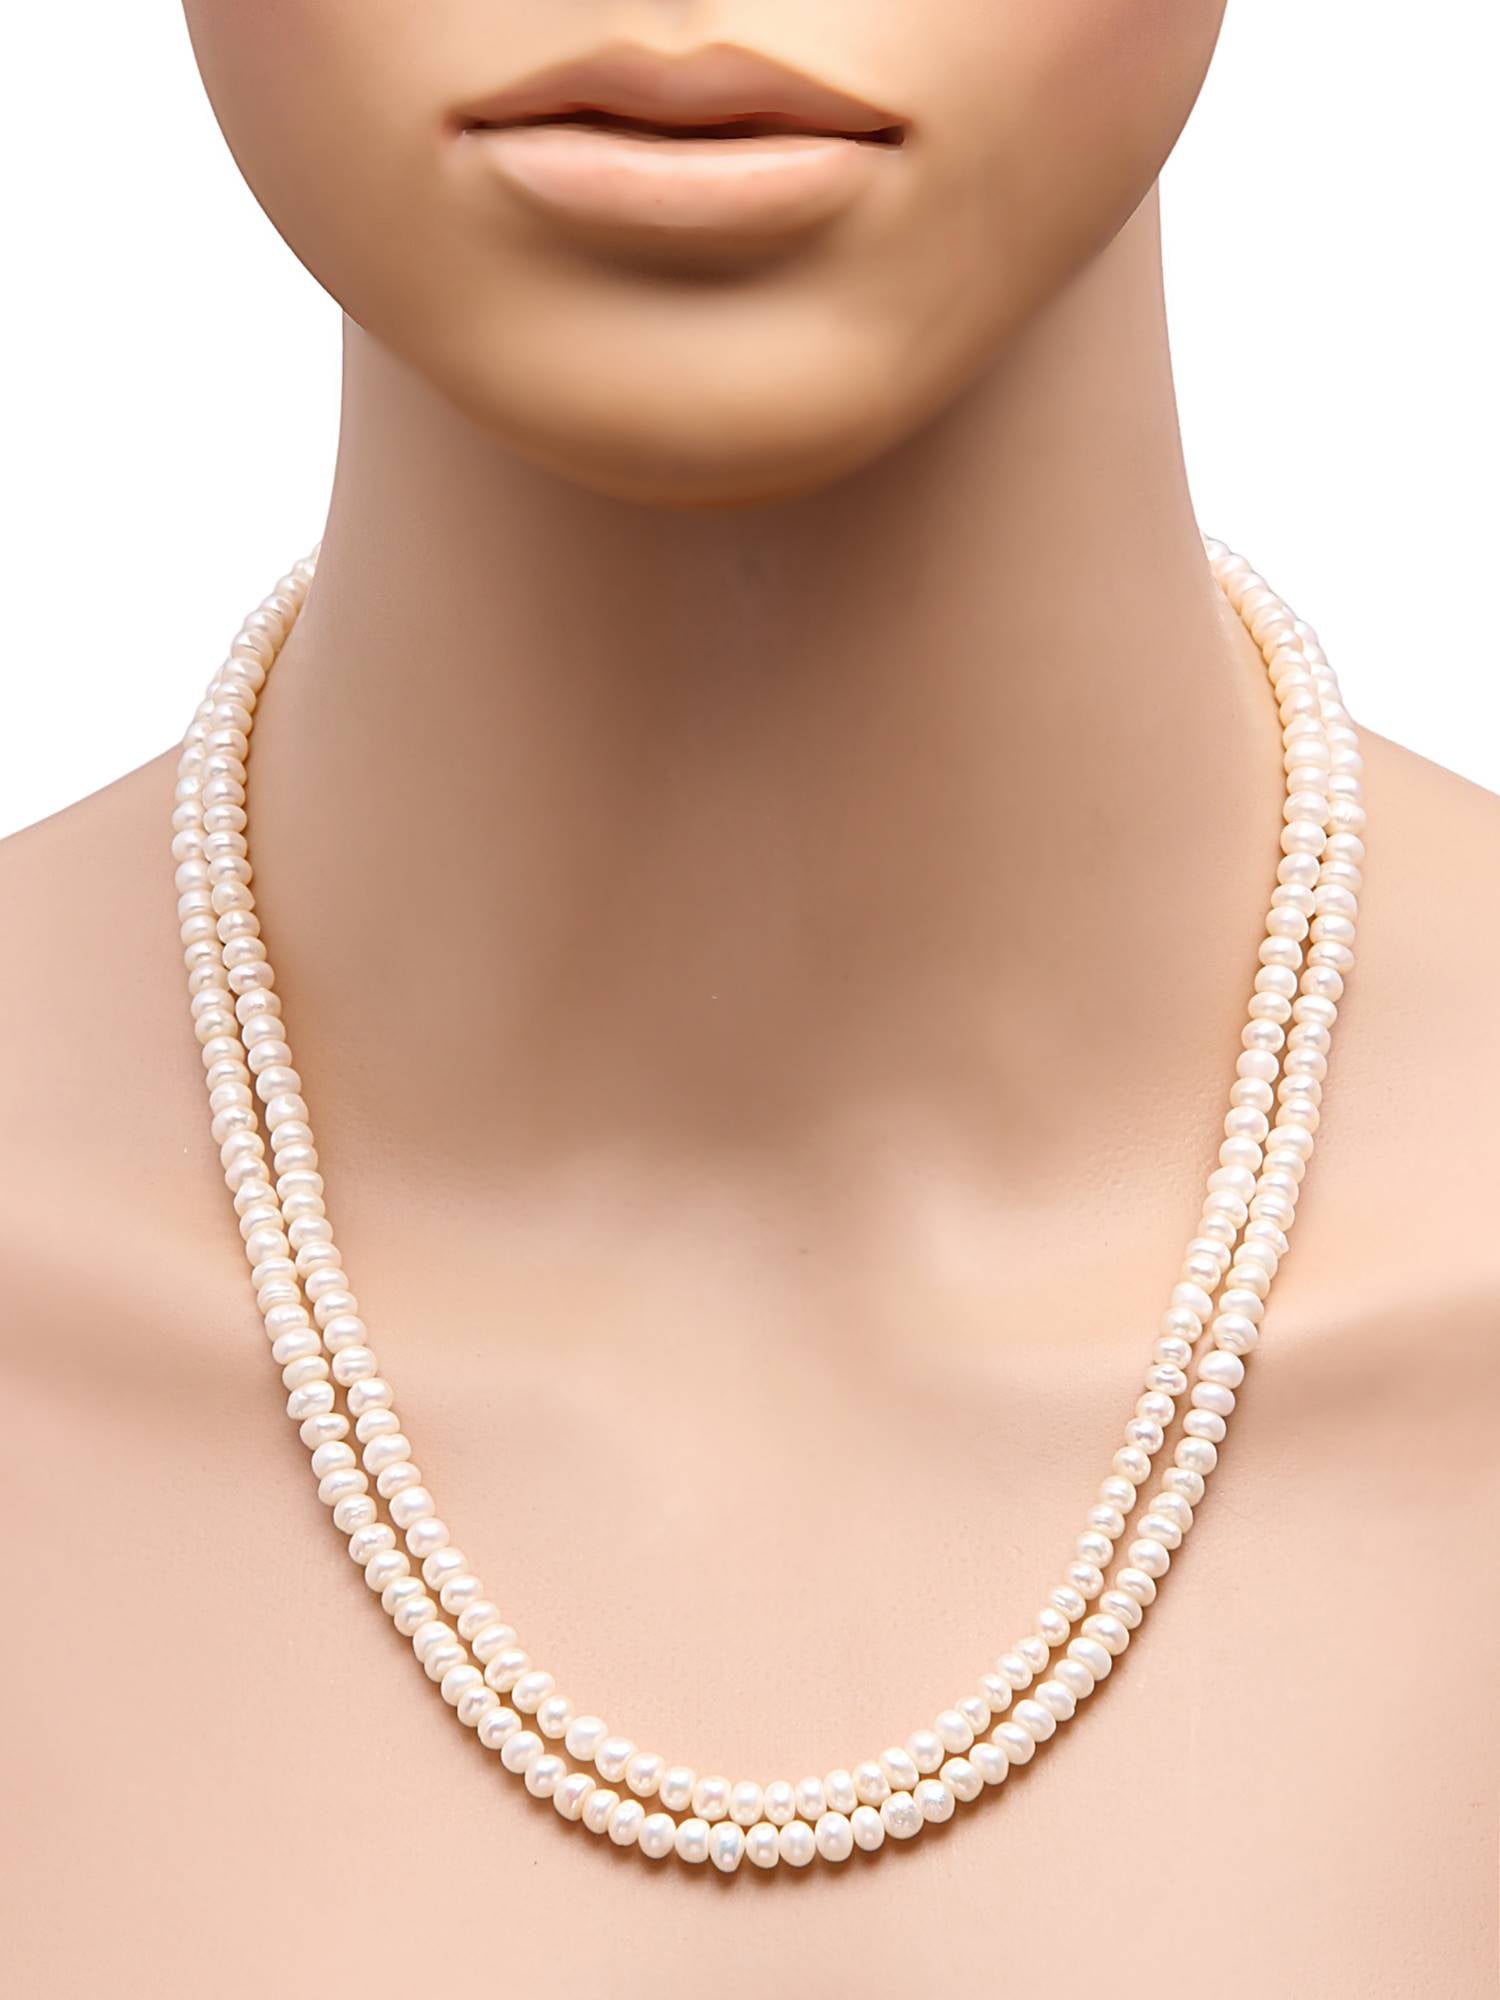 Button Shaped White Freshwater Double Layered Necklace with 92.5 Sterling Silver Clasp, 160 carats - (F1009)